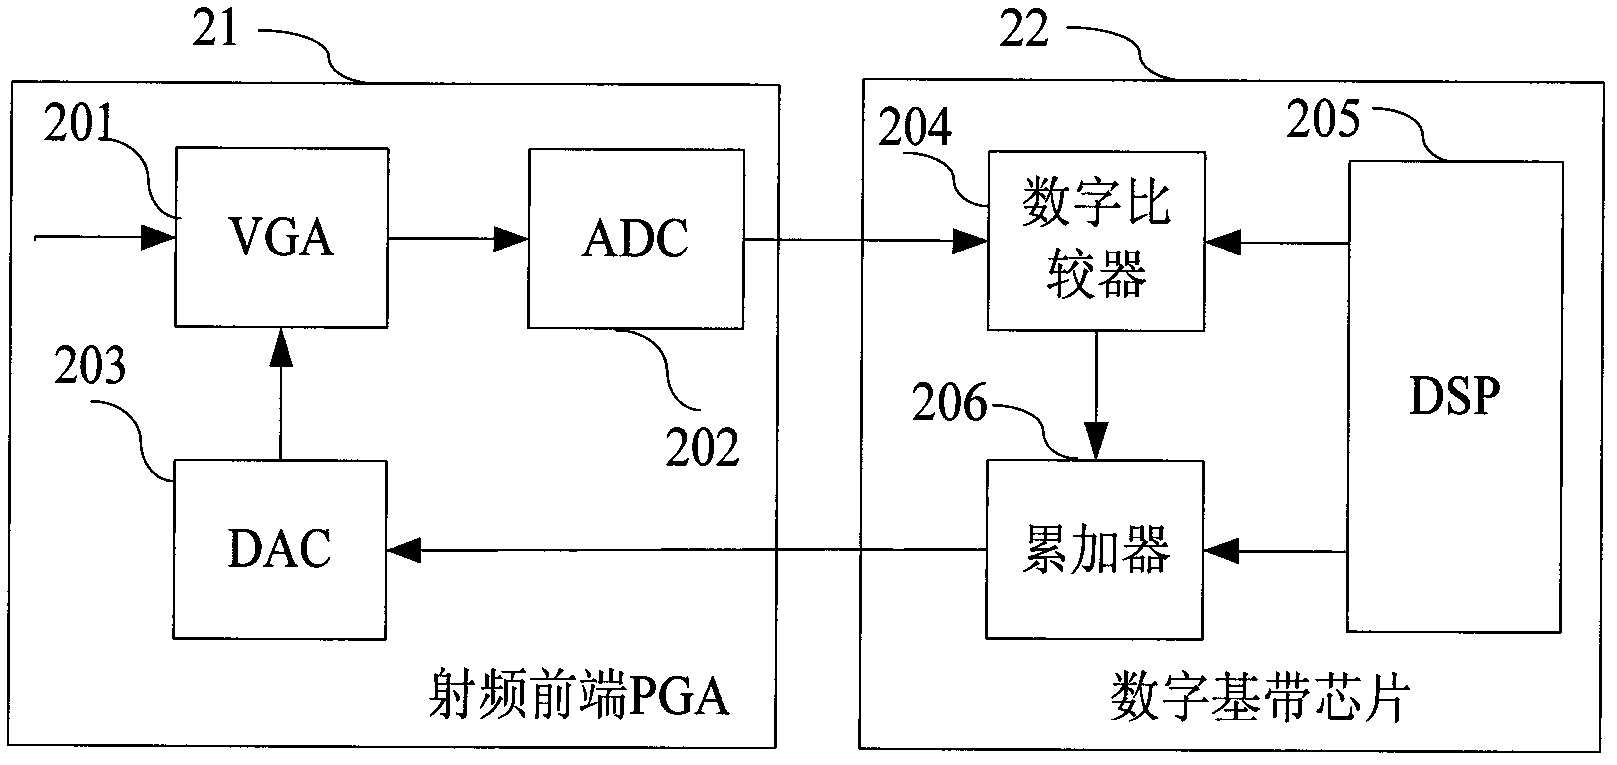 Radio frequency automatic gain control amplifier